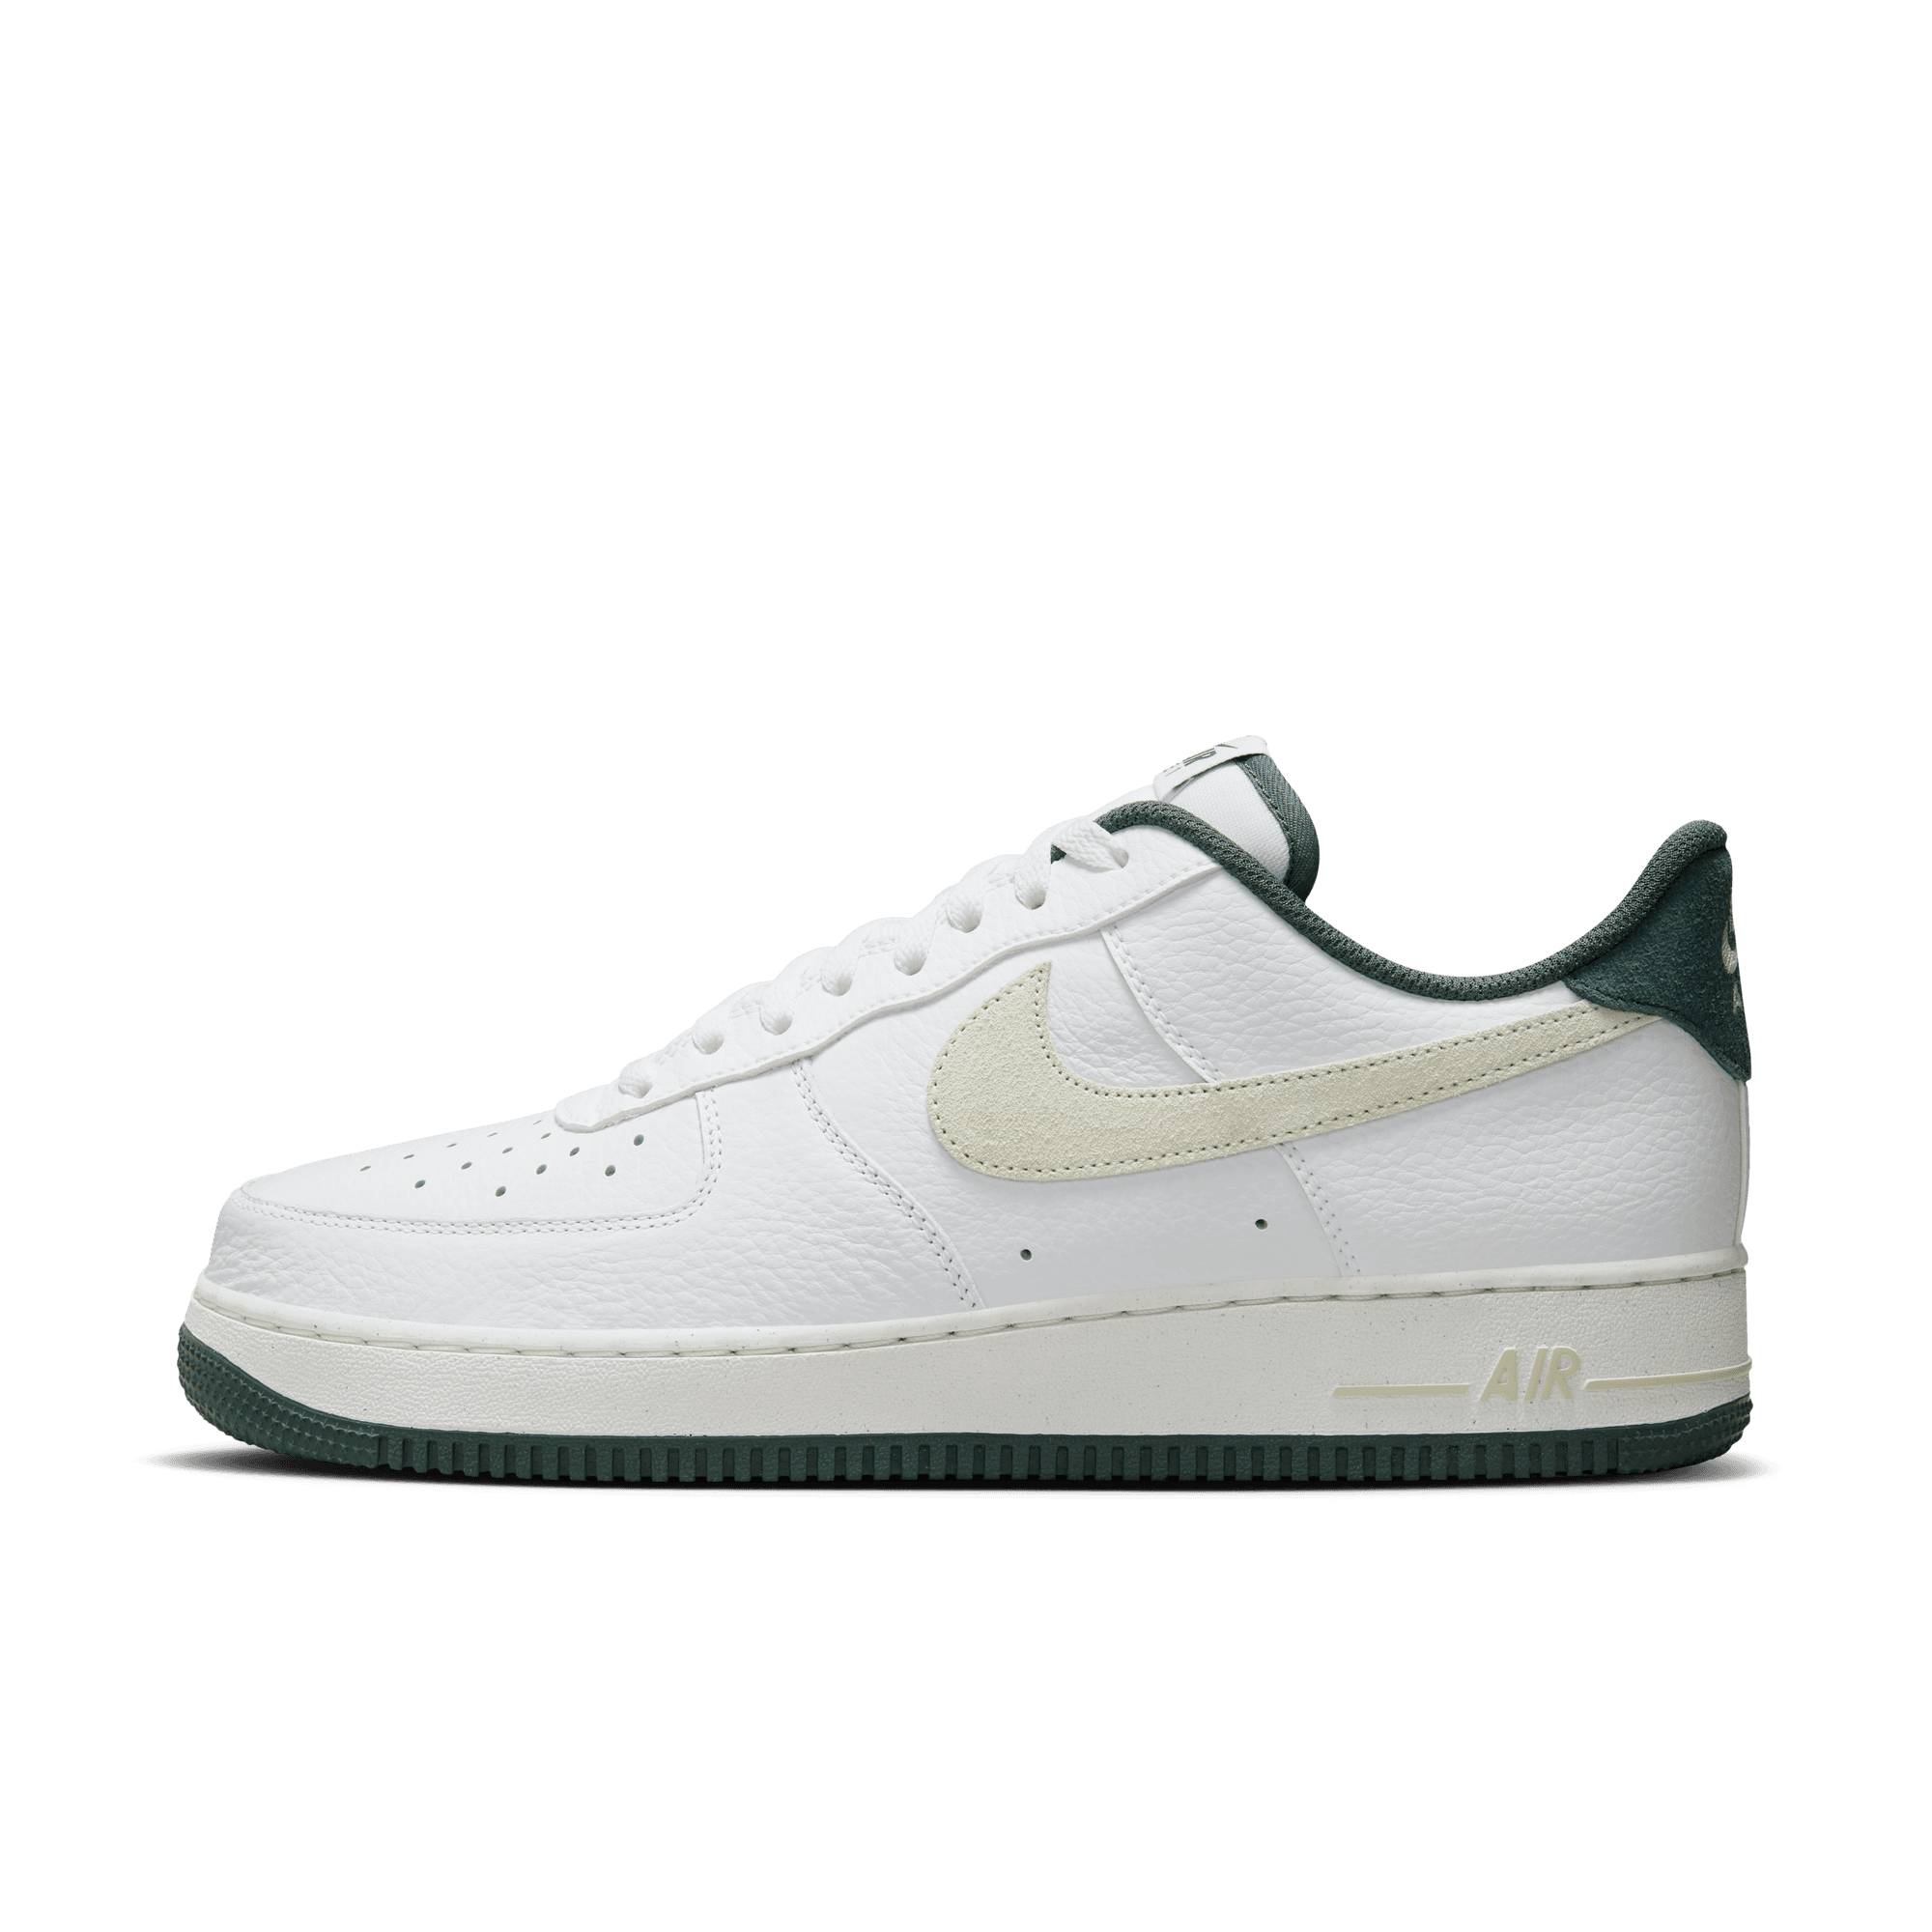 NIKE AIR FORCE 1 '07 LV8 MEN'S SHOES